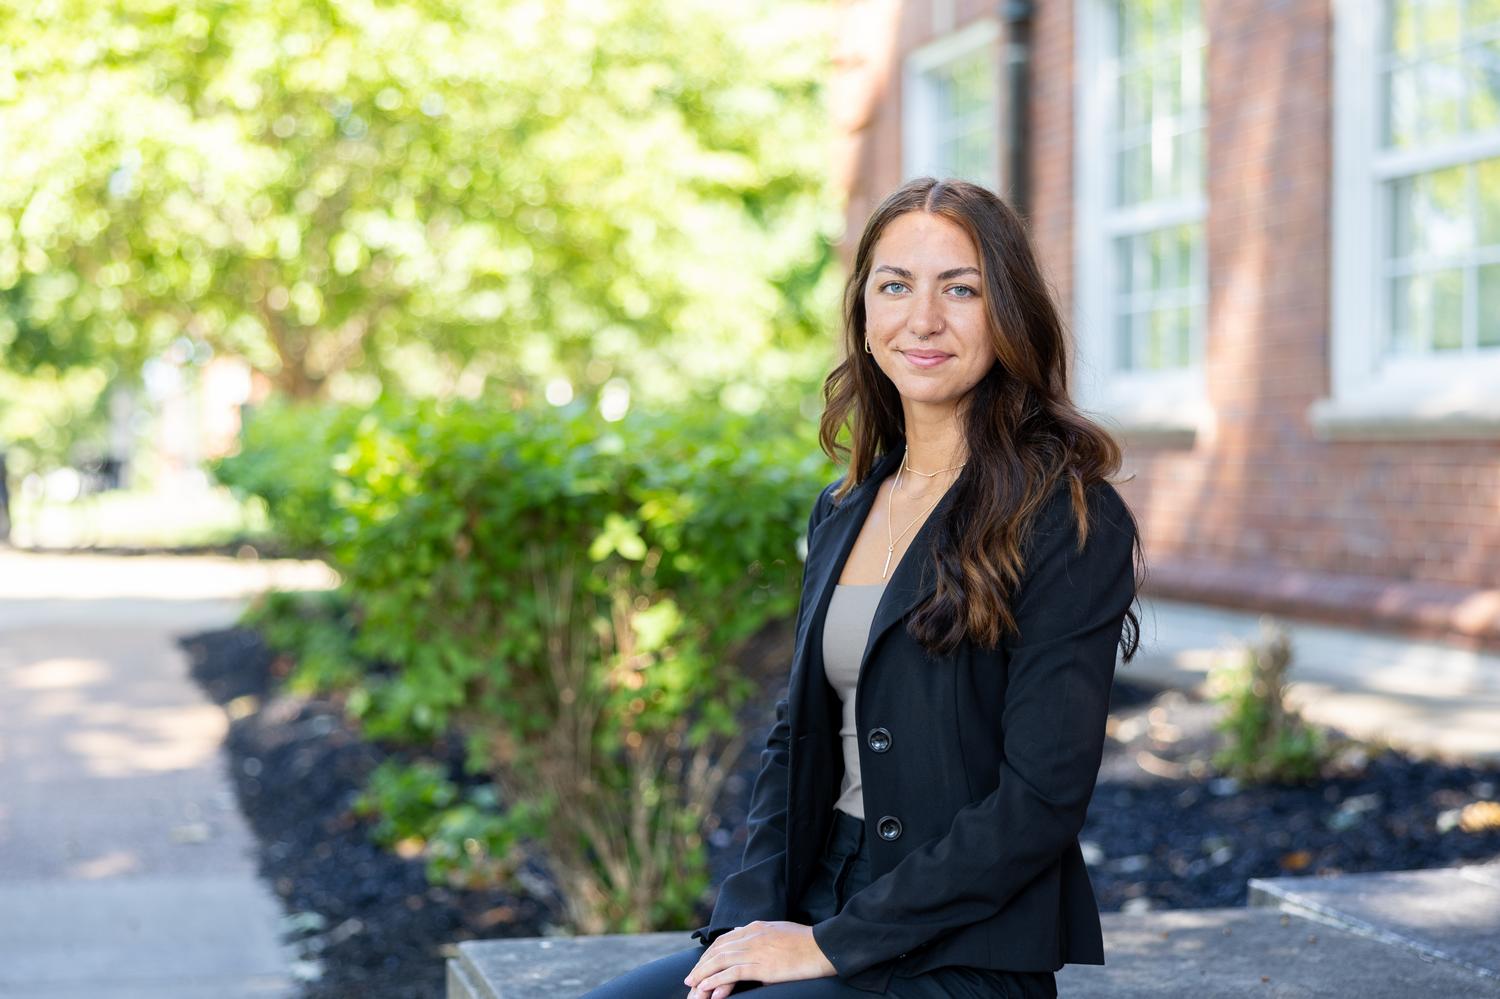 Piper Conditt finds her calling in finance through APSU’s ‘Banking on Govs’ program